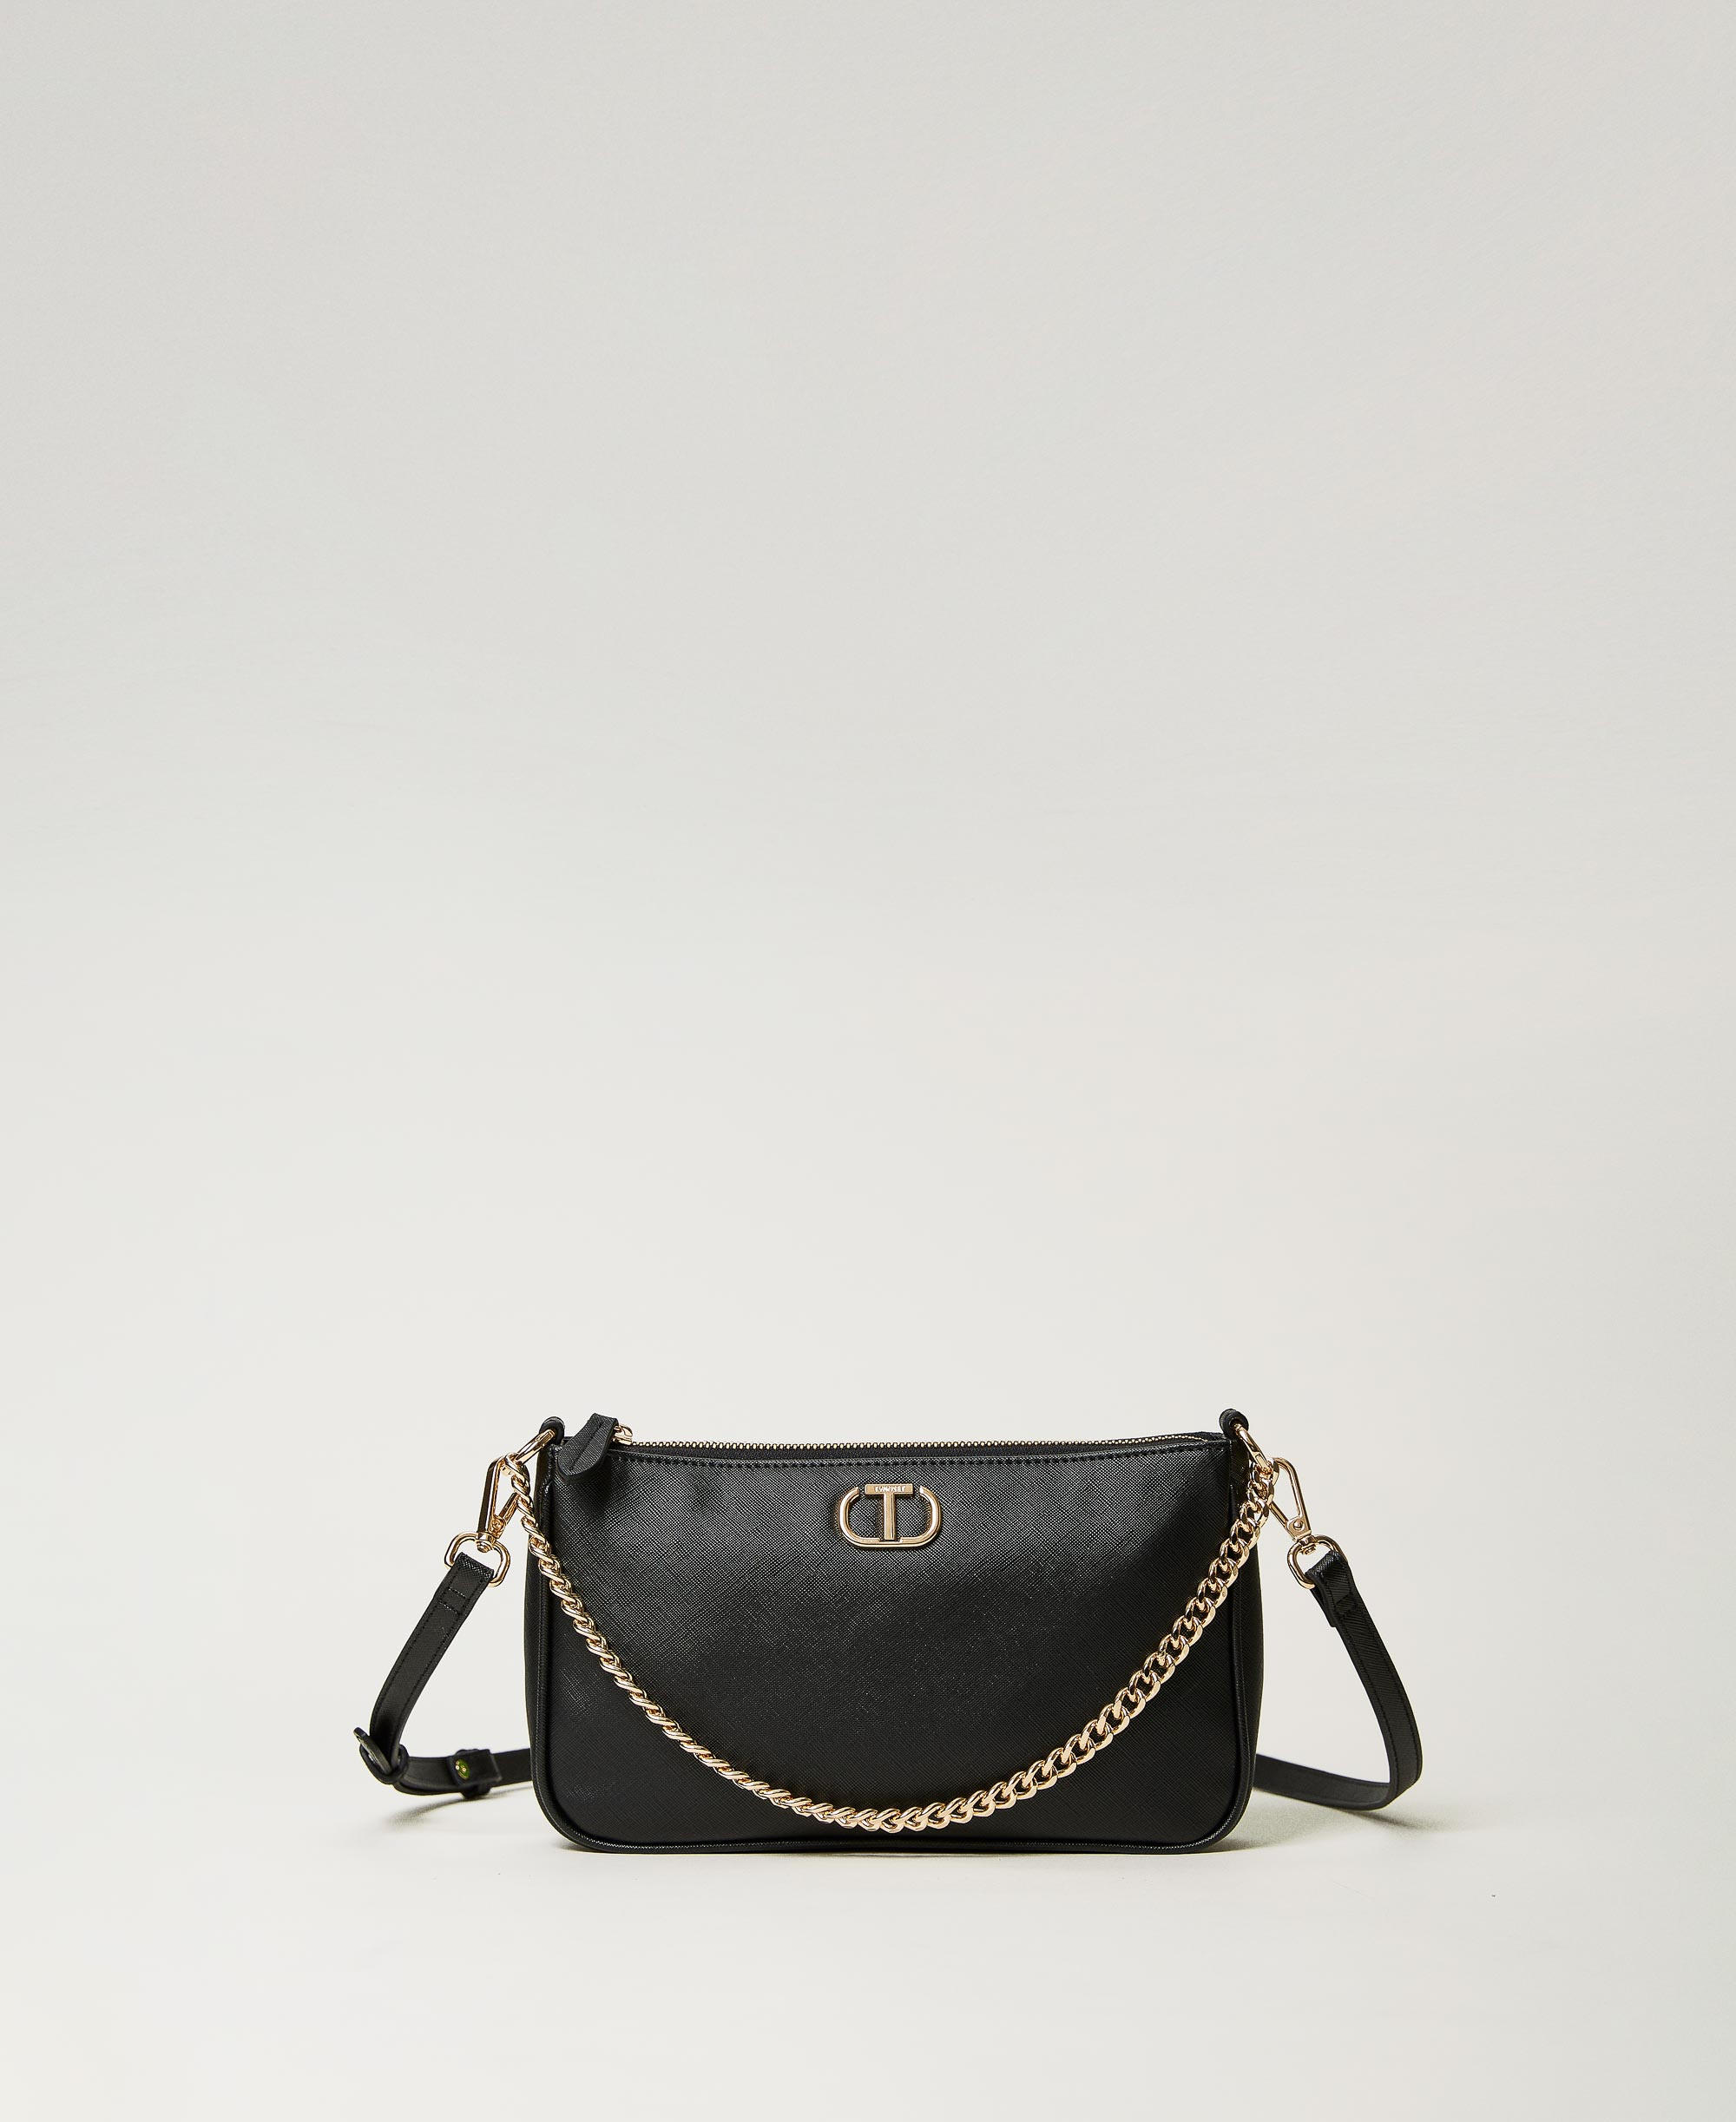 'Mignon' shoulder bag with Oval T